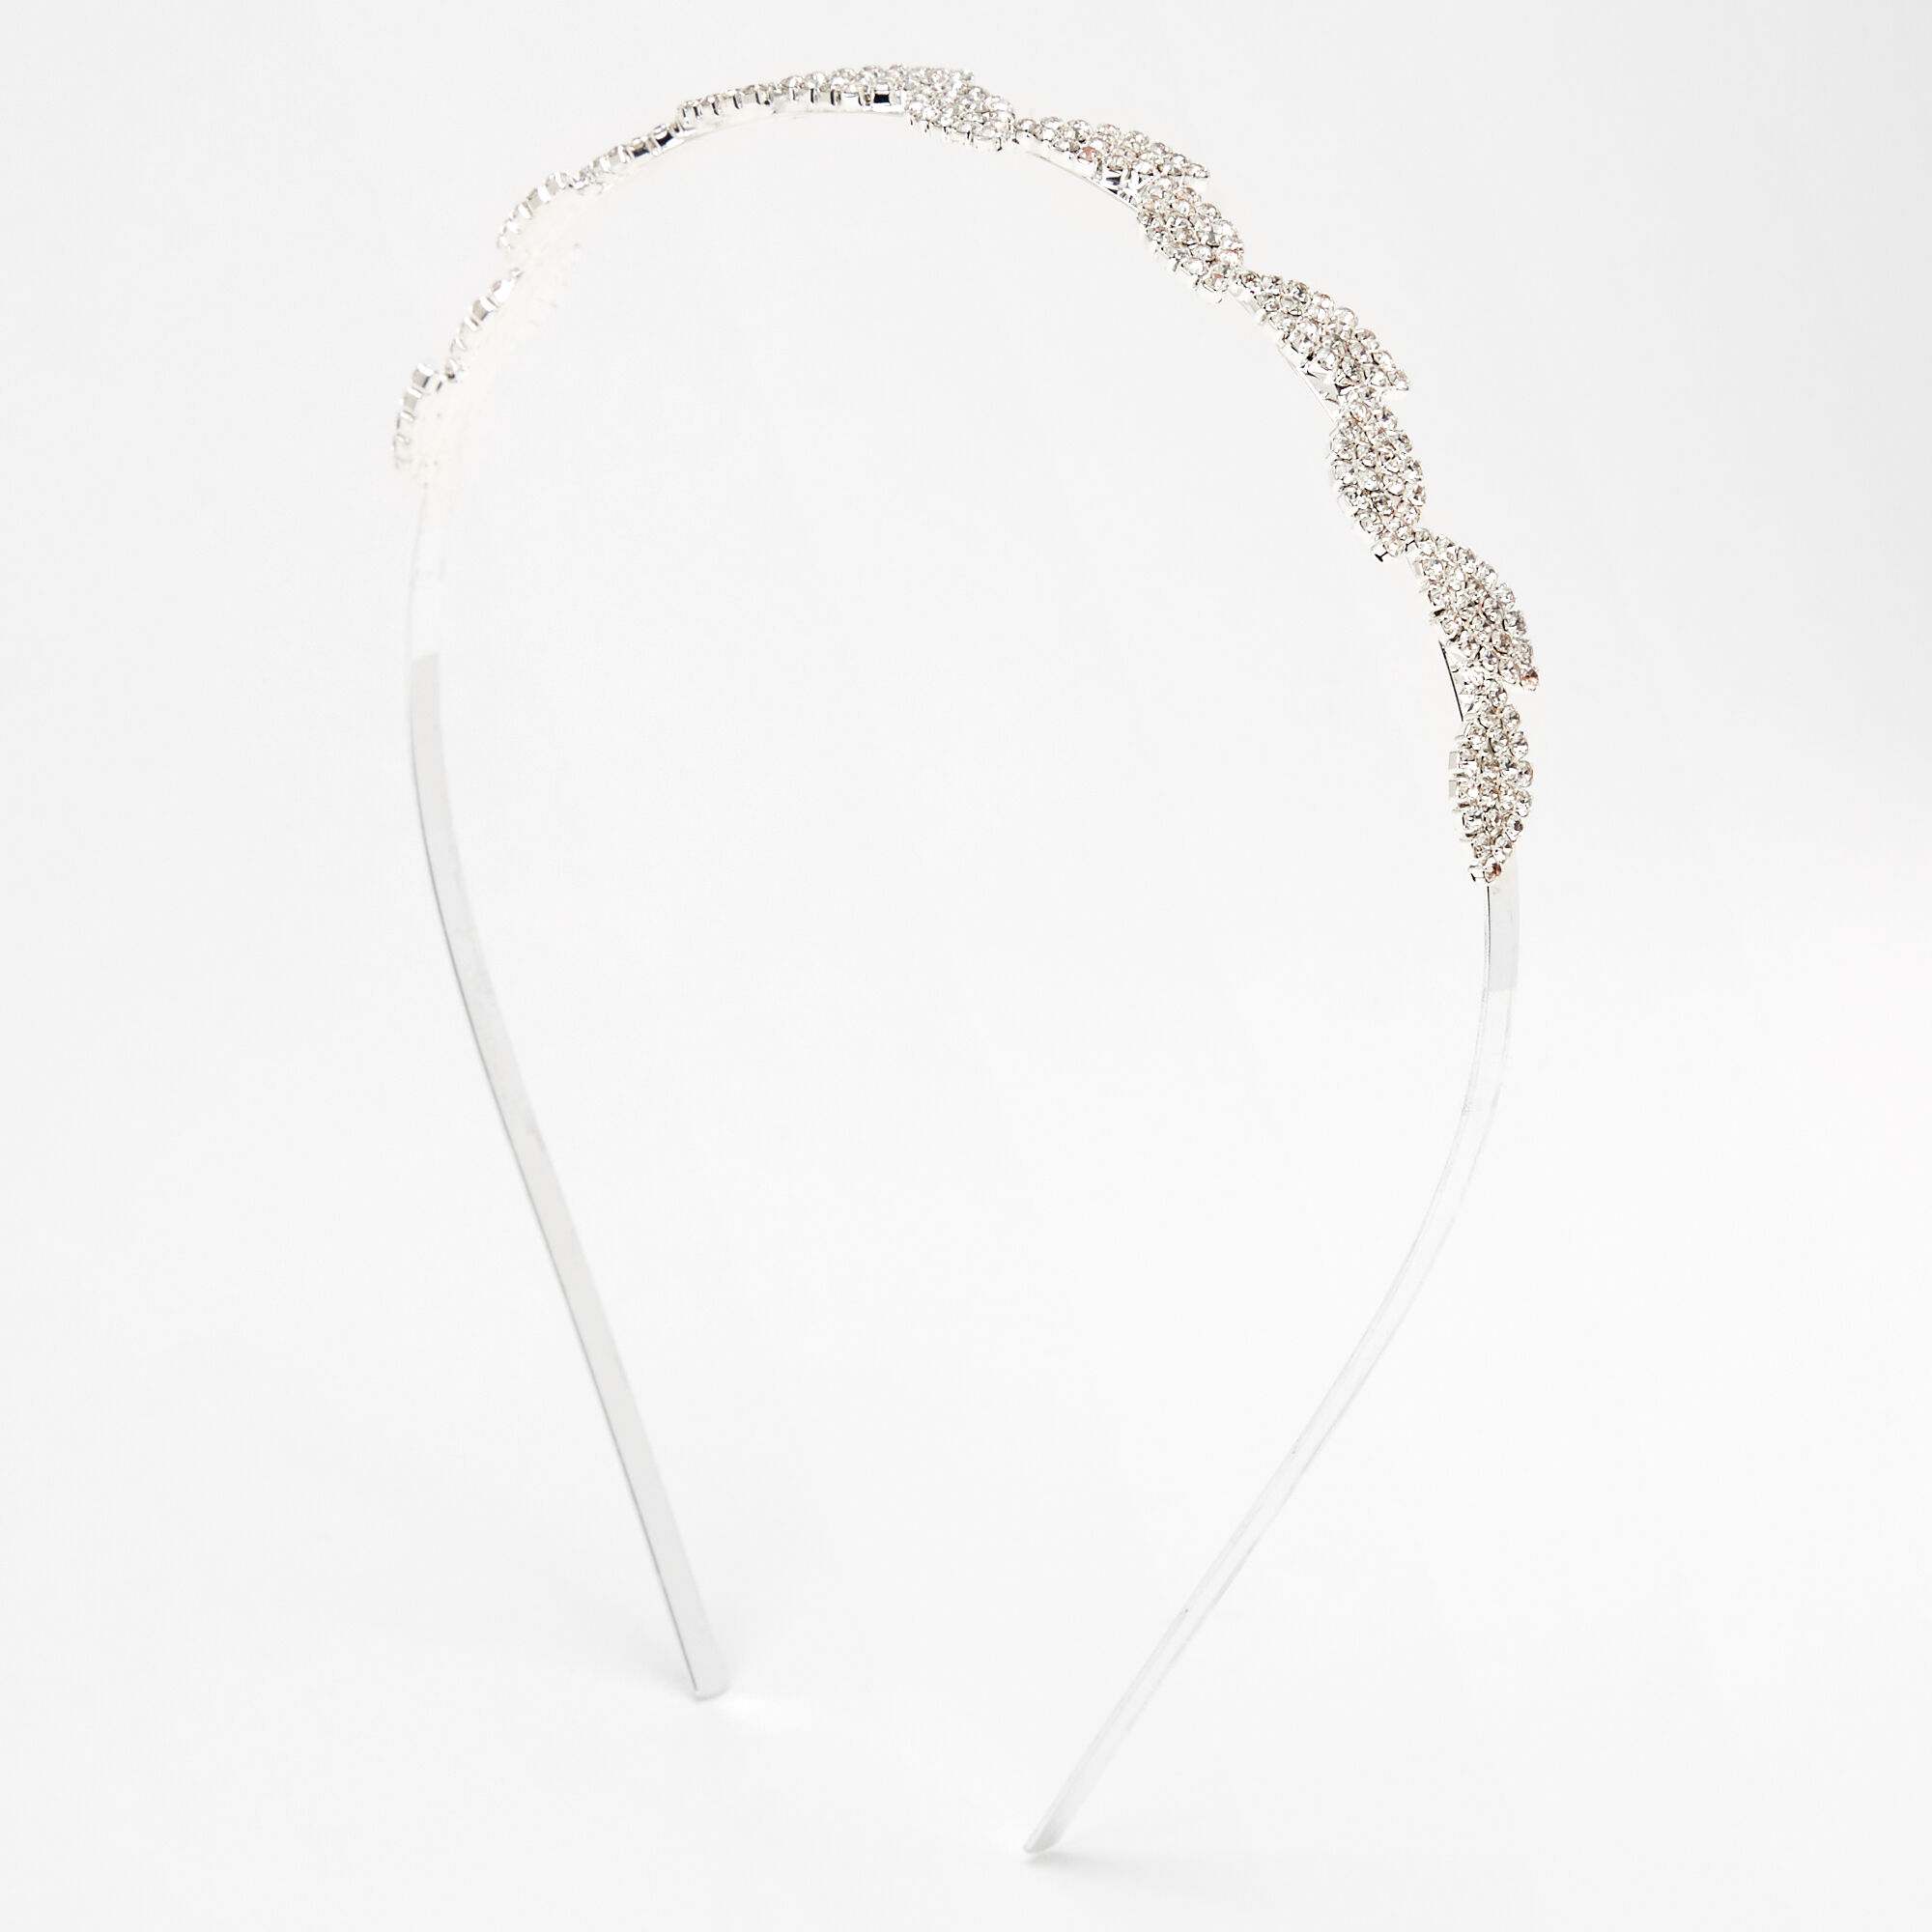 View Claires Tone Pave Rhinestone Leaf Headband Silver information